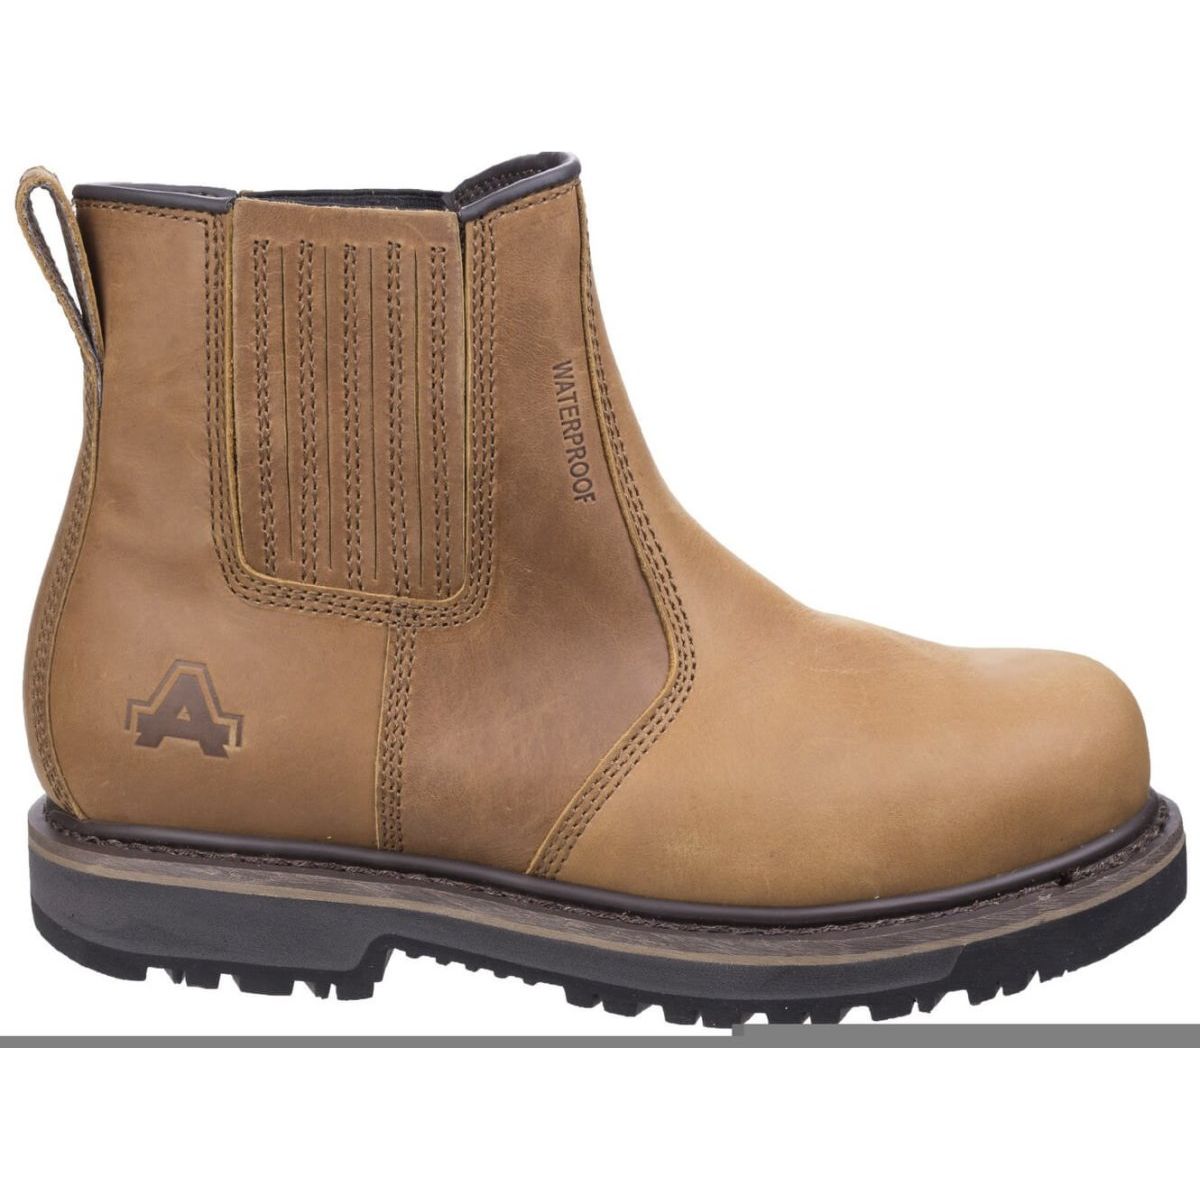 Amblers As232 Safety Boots Mens - workweargurus.com